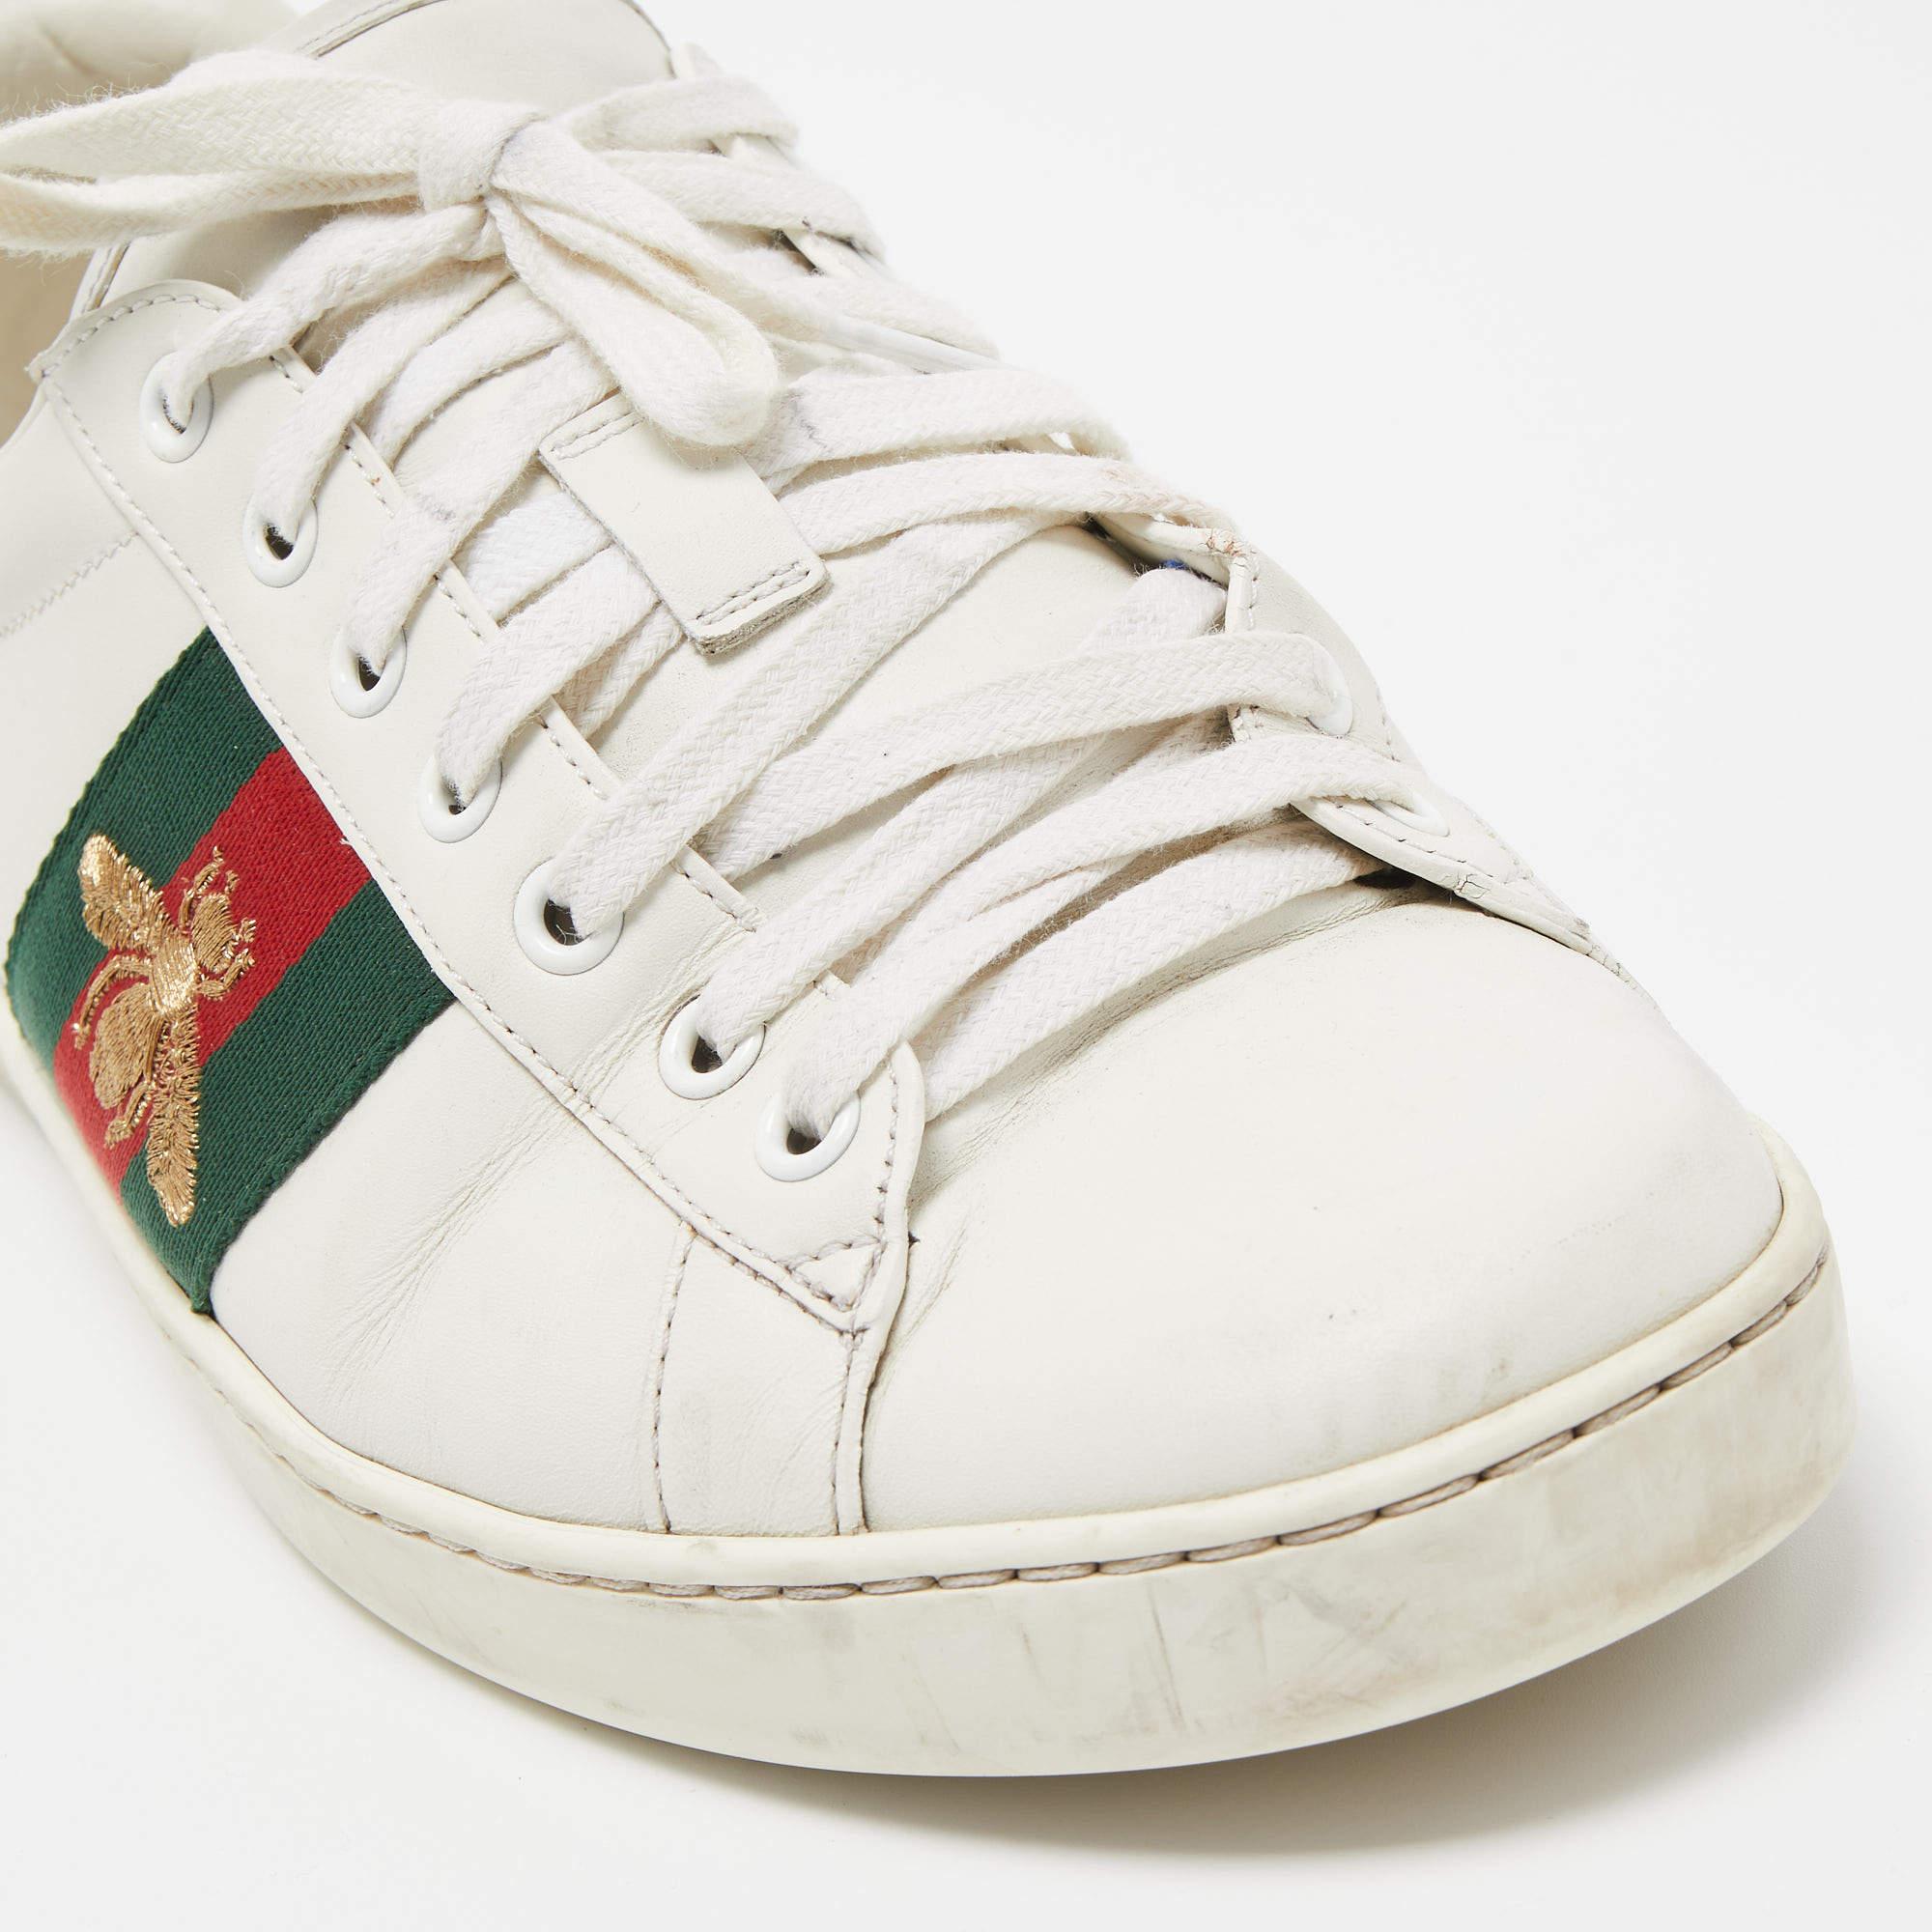 Gucci White Leather Embroidered Bee Ace Sneakers Size 43 2